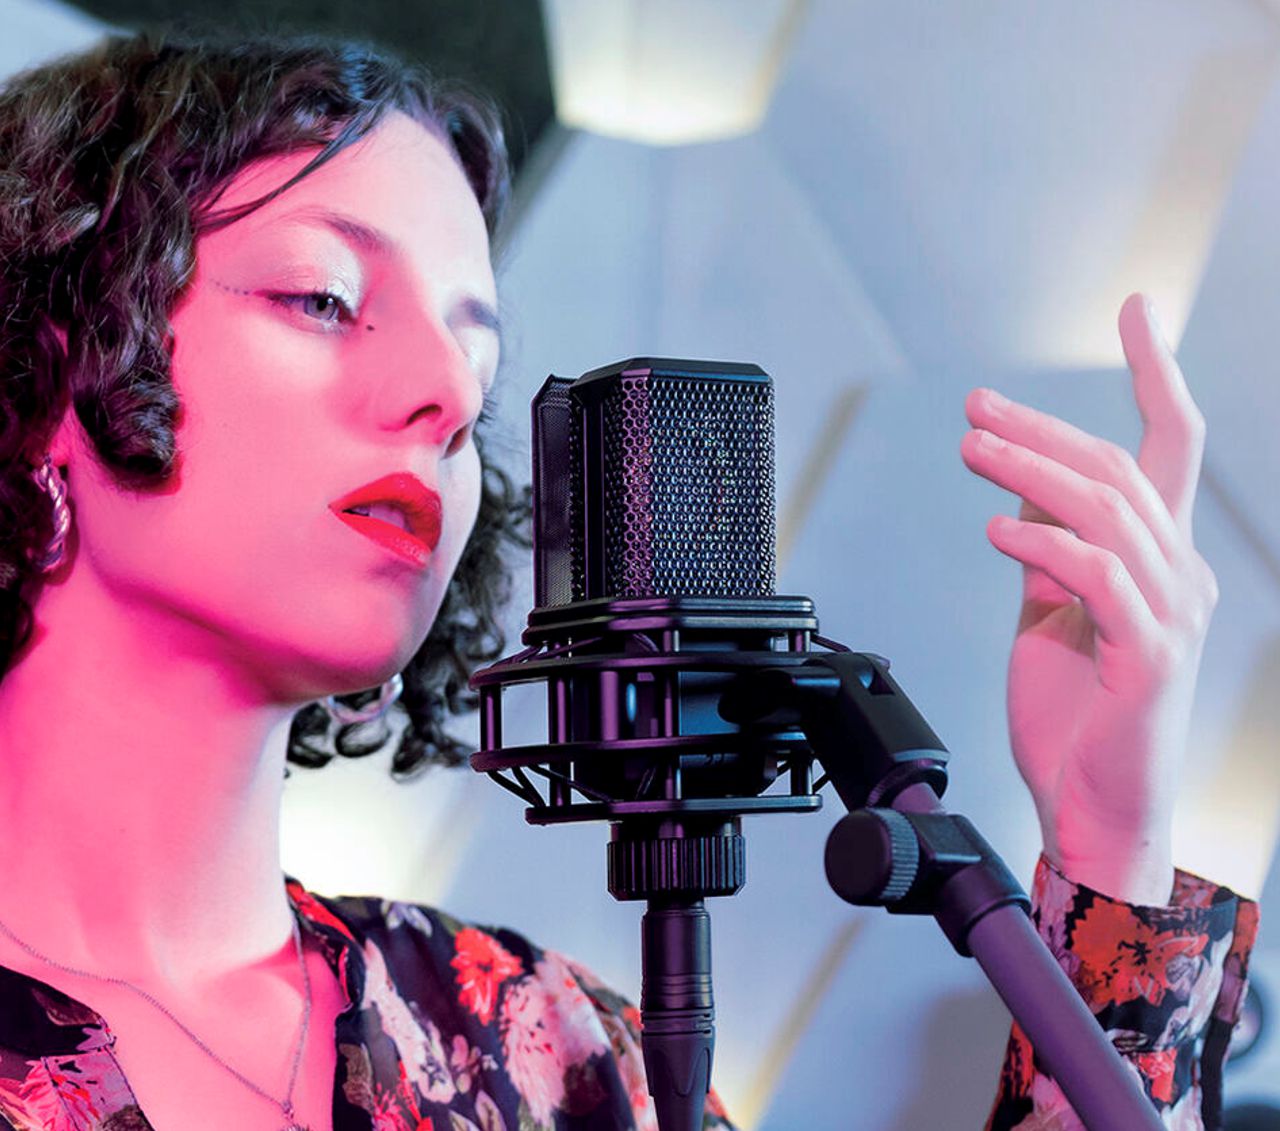 Join the Lewitt music challenge and win microphones